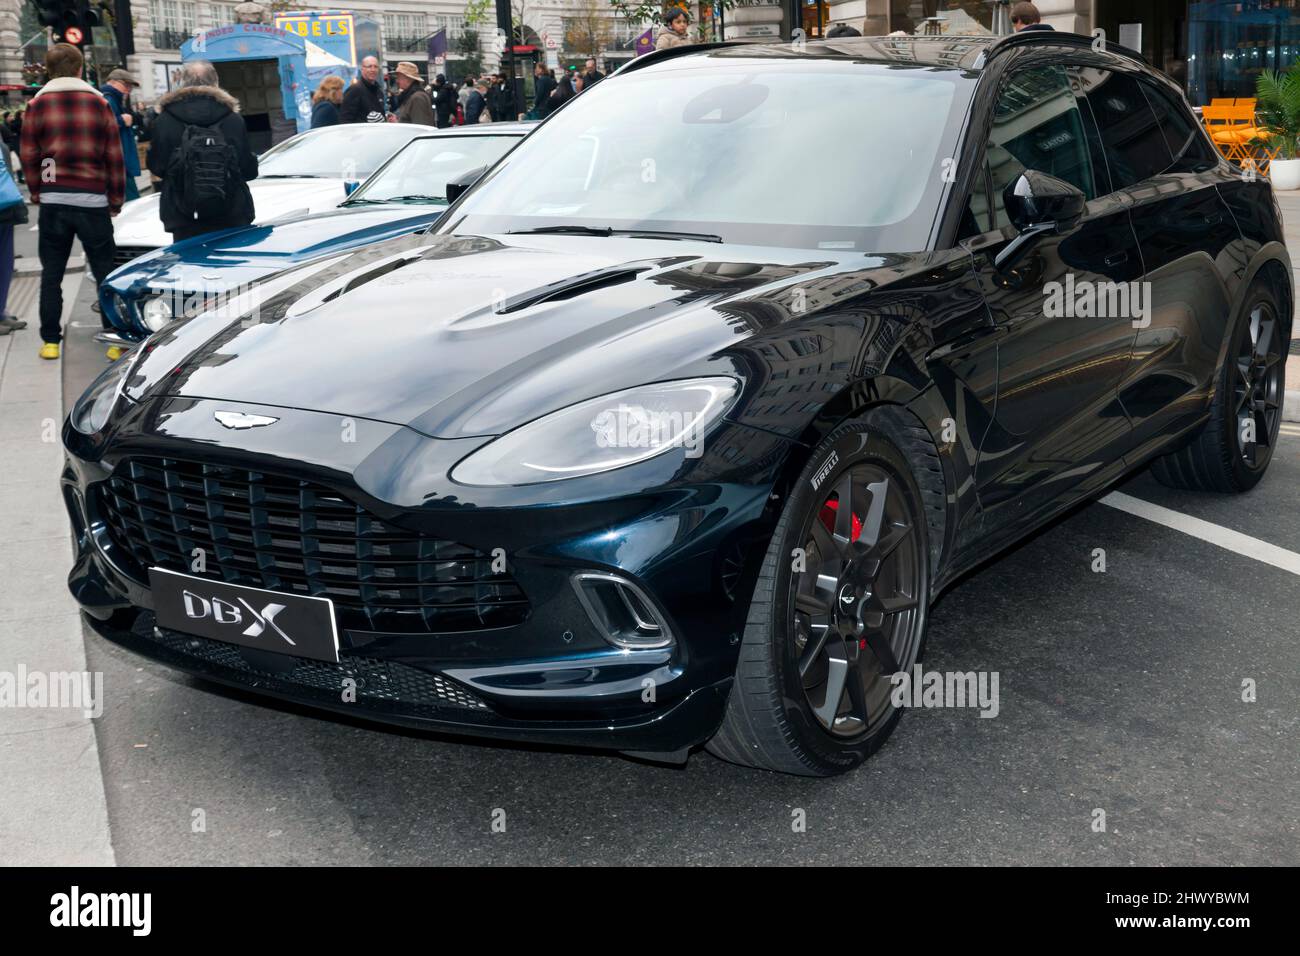 Three-quarter front view of an Aston Martin DBX,  on display at the 2021 Regents Street Motor Show Stock Photo